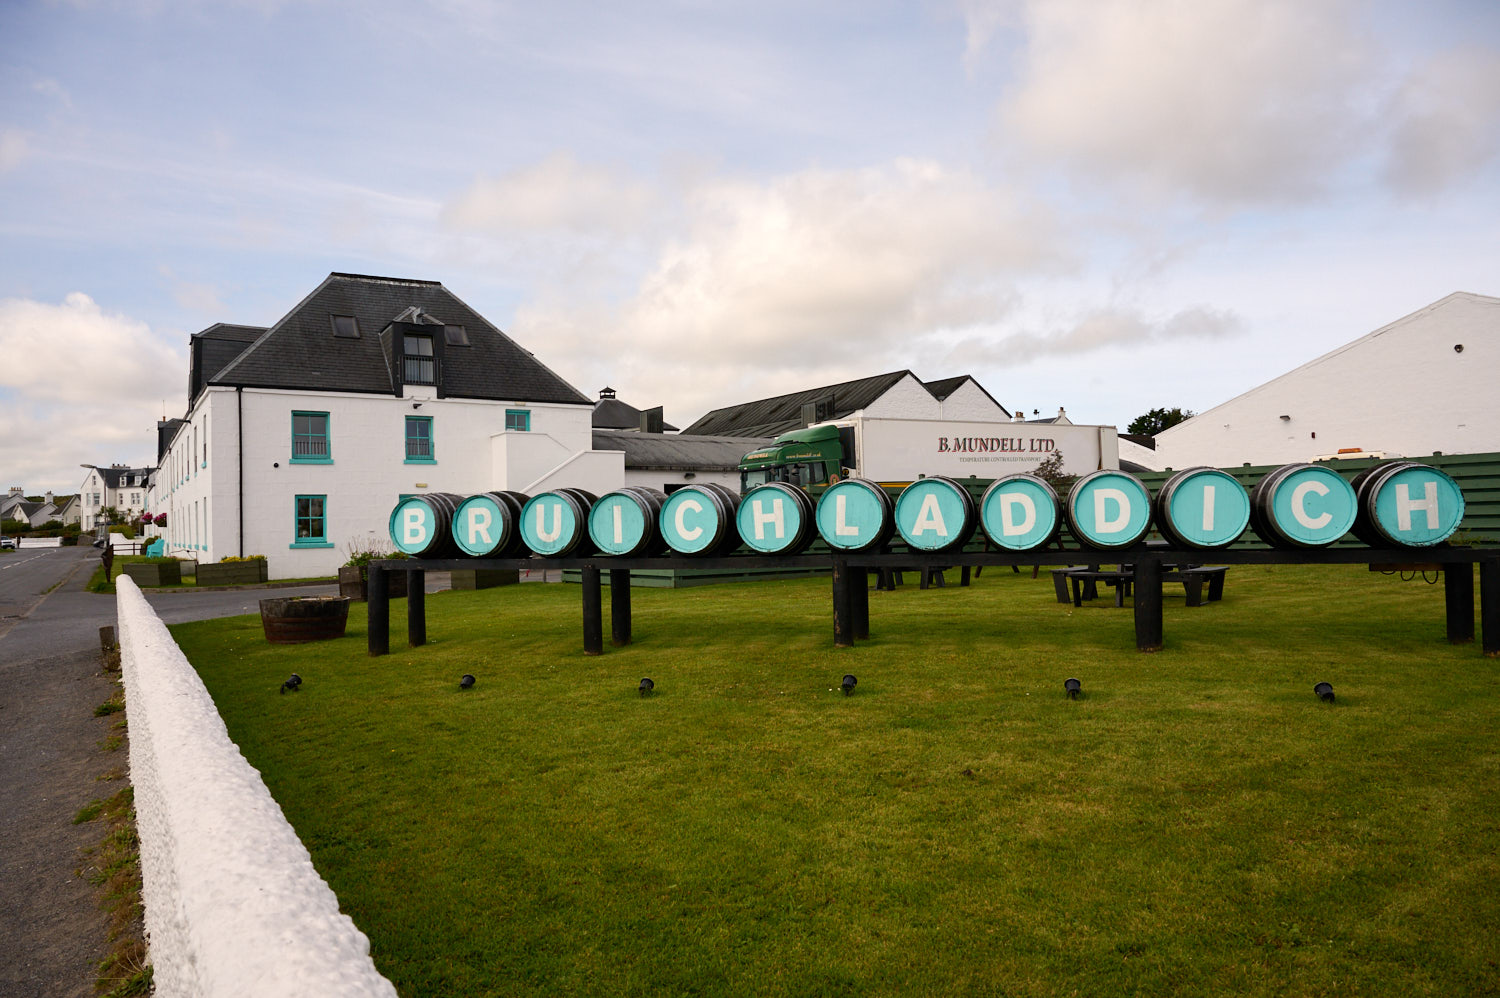 Taking a tour around Rinns of islay, from Lossit Bay back to Port Charlotte